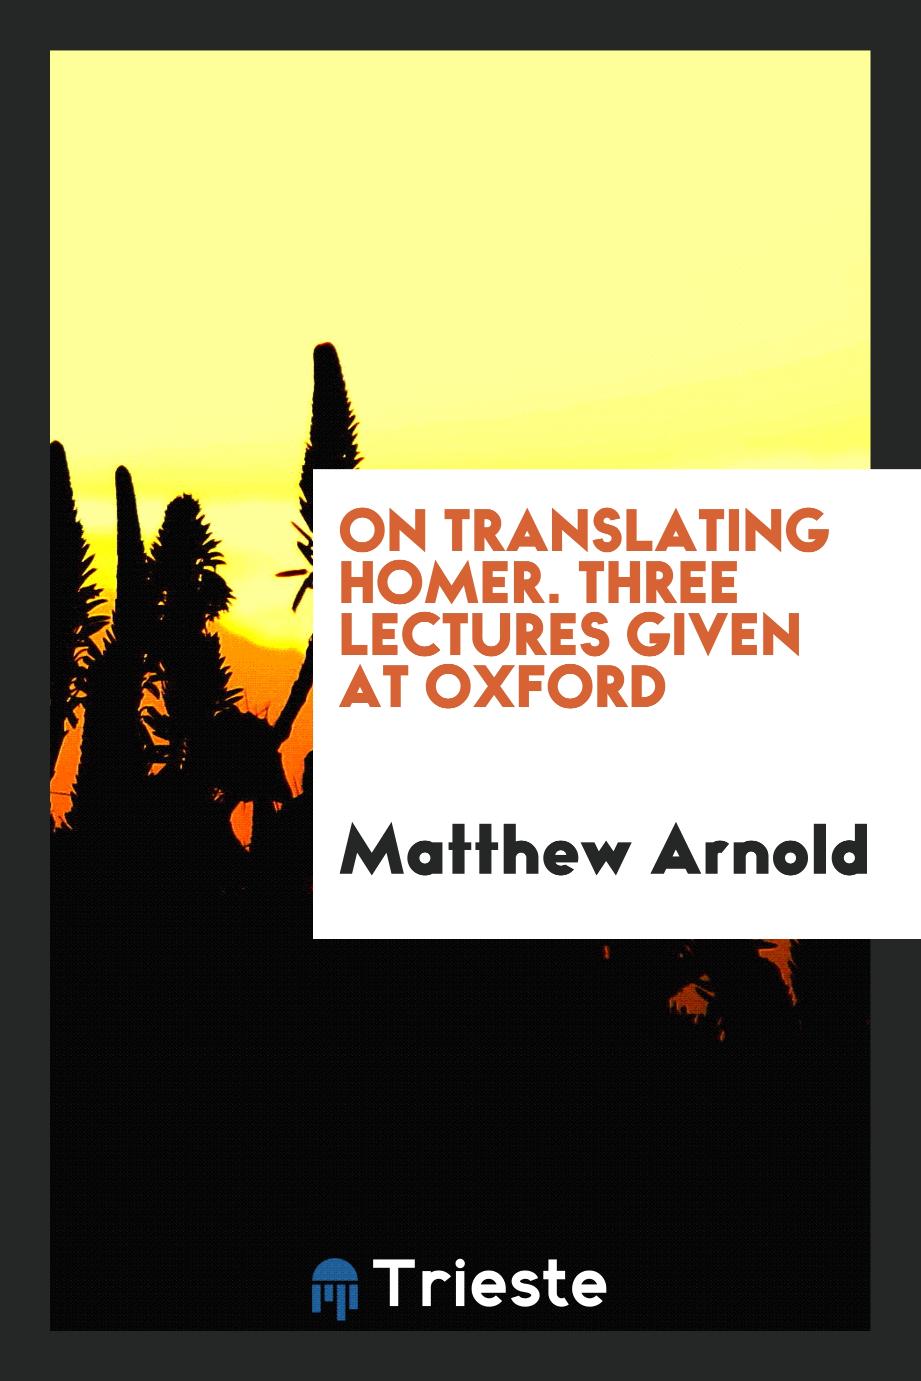 On translating Homer. Three lectures given at Oxford